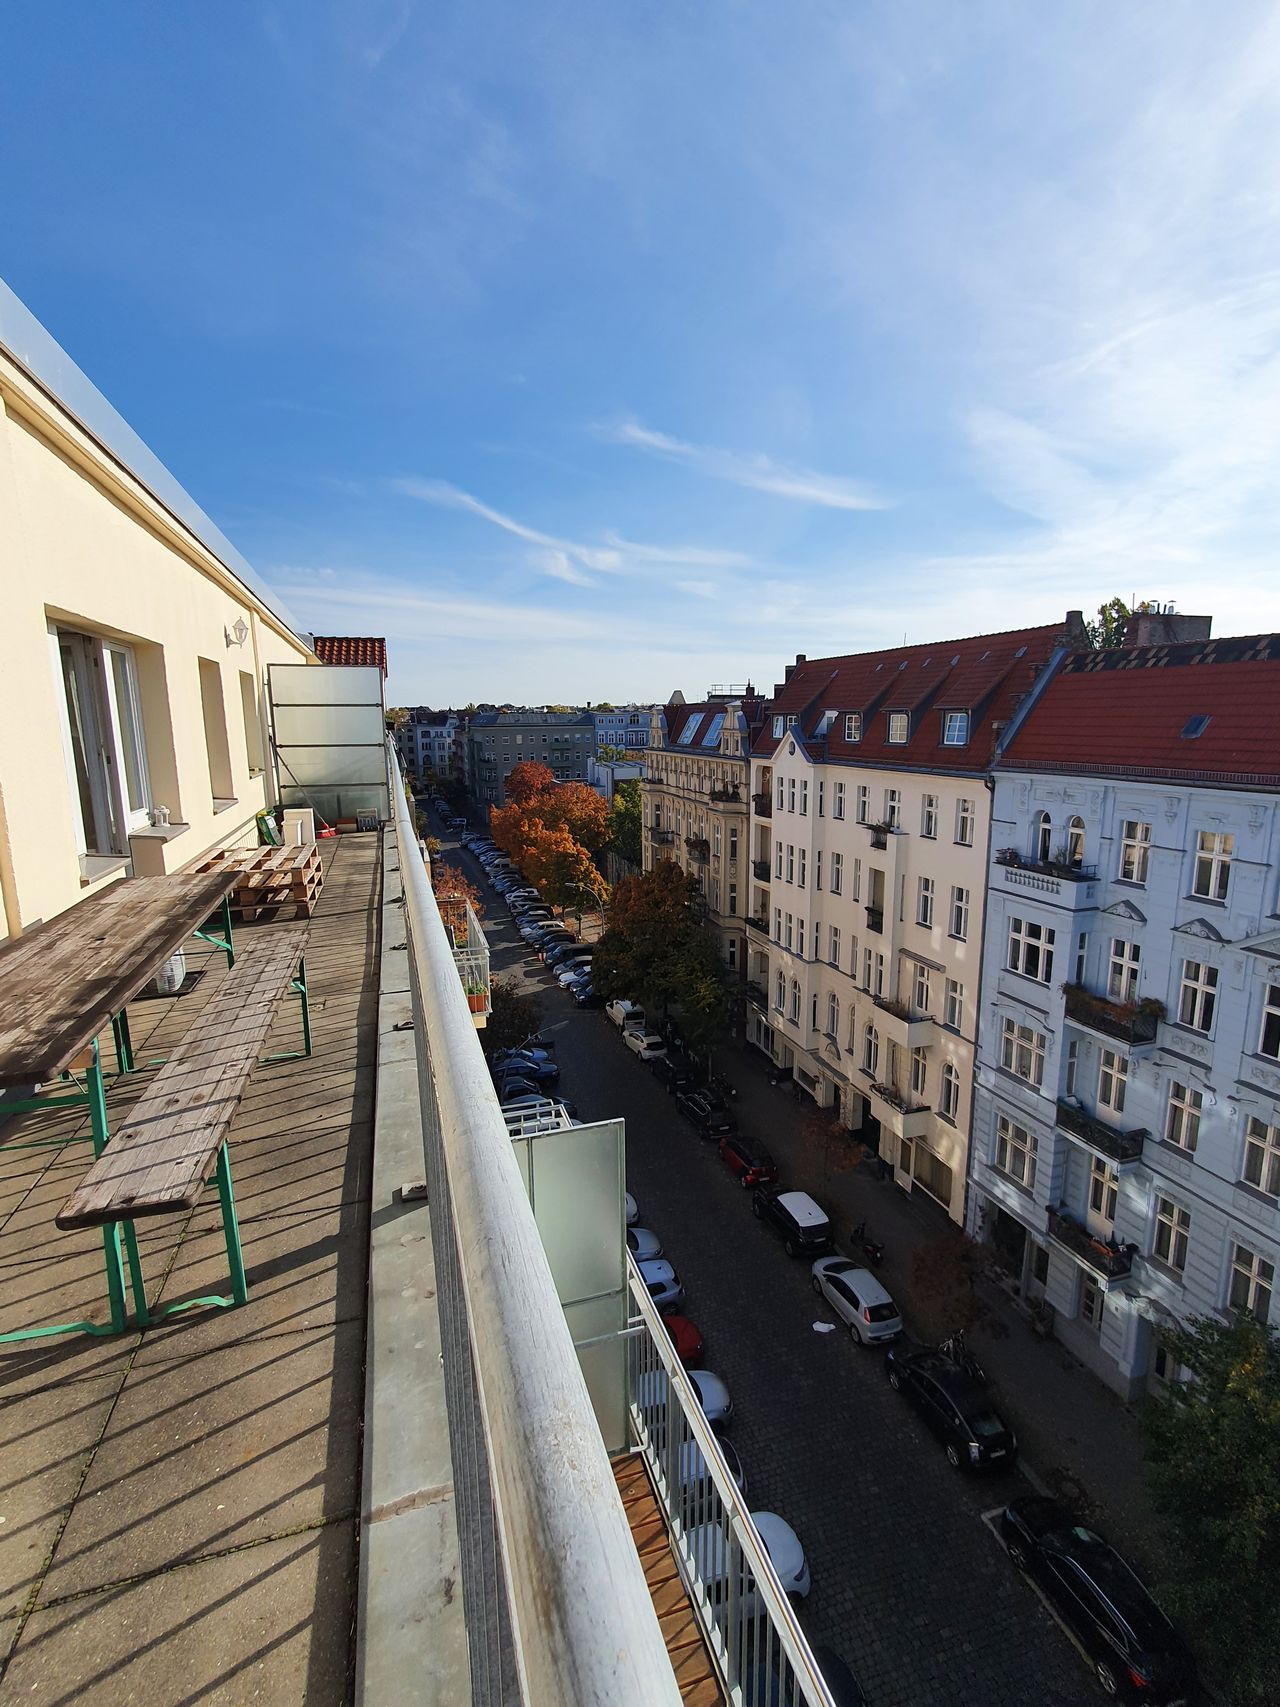 Beautiful sunny Flat with big Terrasse at the upper floor